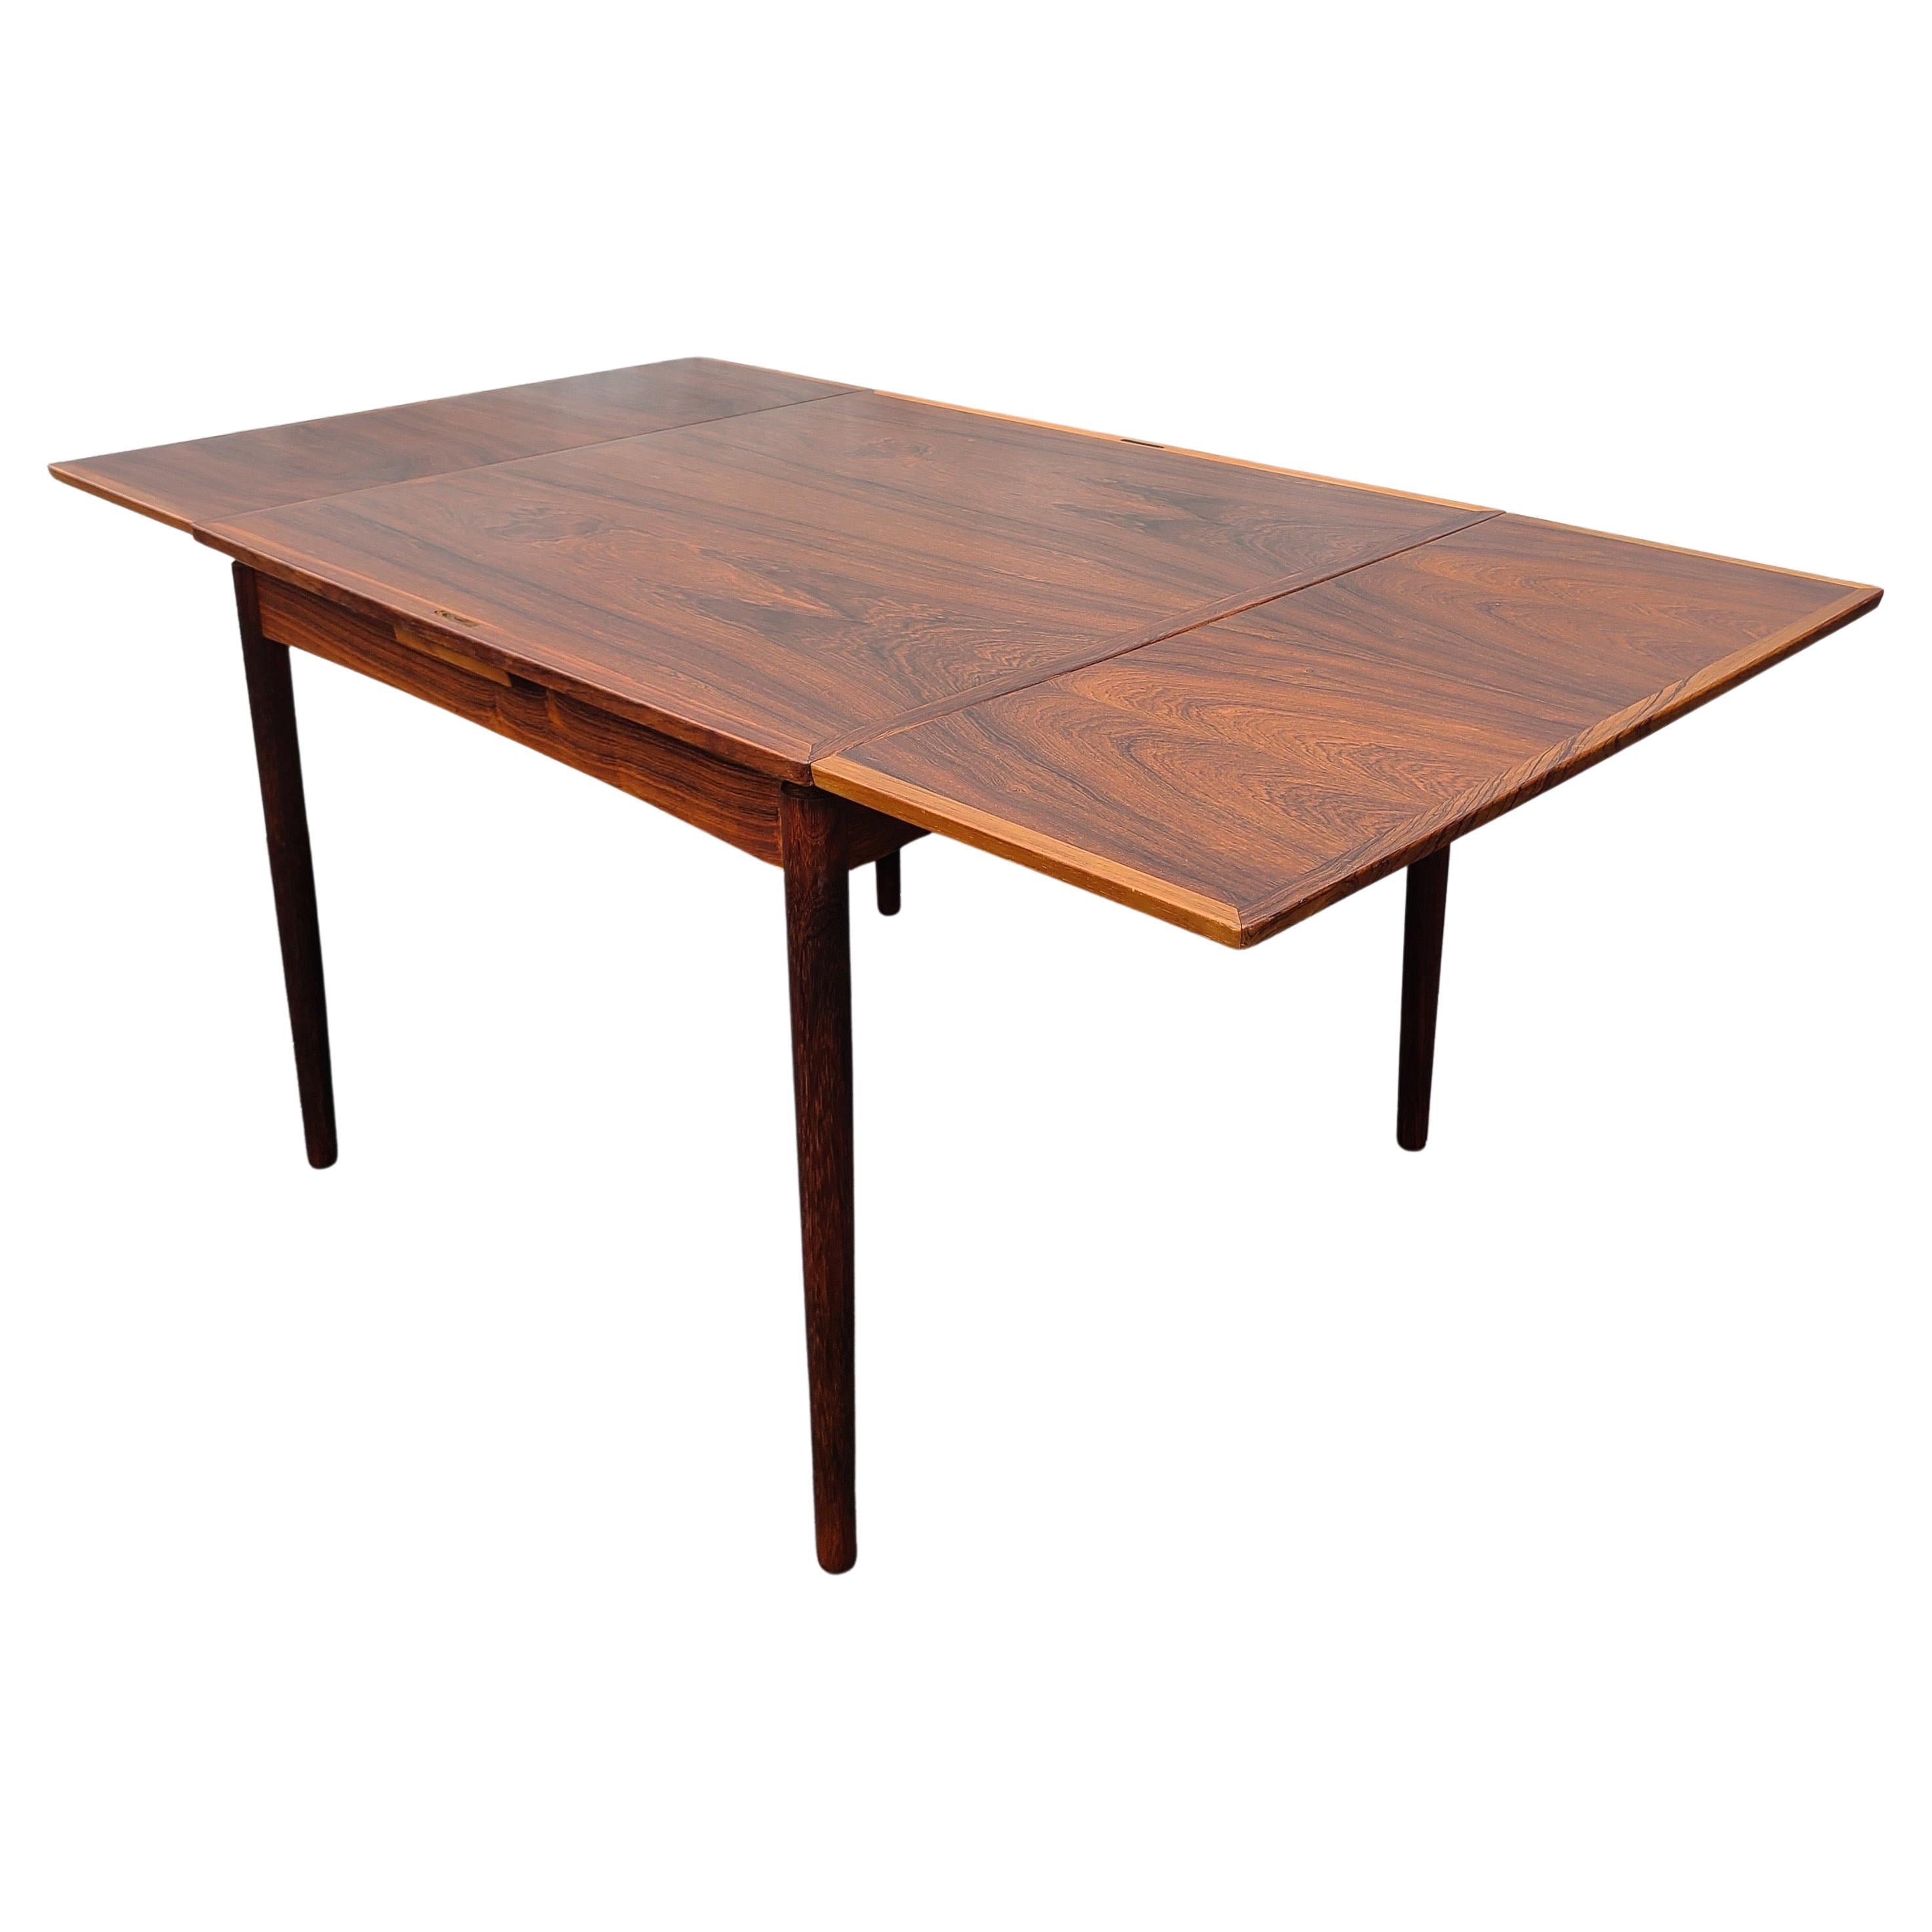 Danish Rosewood Leather Dining Table Carlo Jensen for Poul Hundevad 1